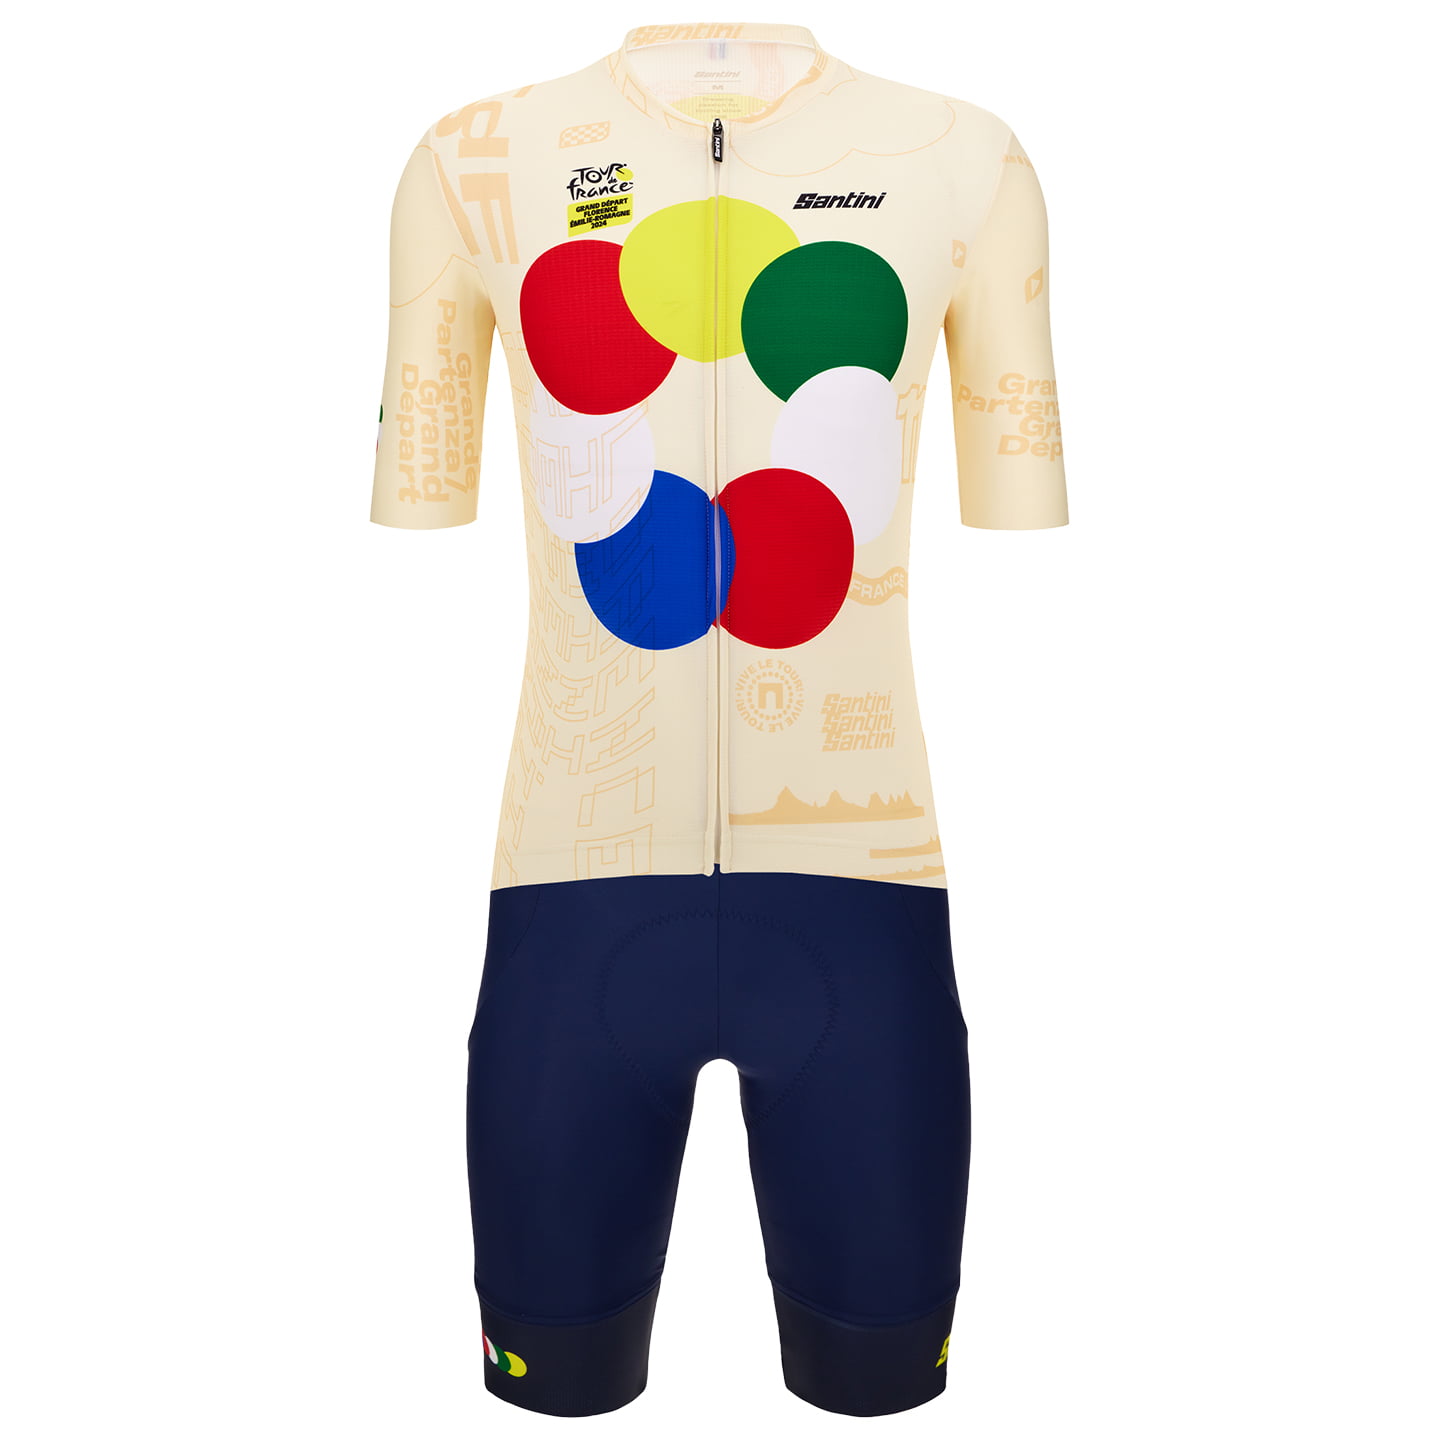 TOUR DE FRANCE Grand Depart Florence 2024 Set (cycling jersey + cycling shorts) Set (2 pieces), for men, Cycling clothing